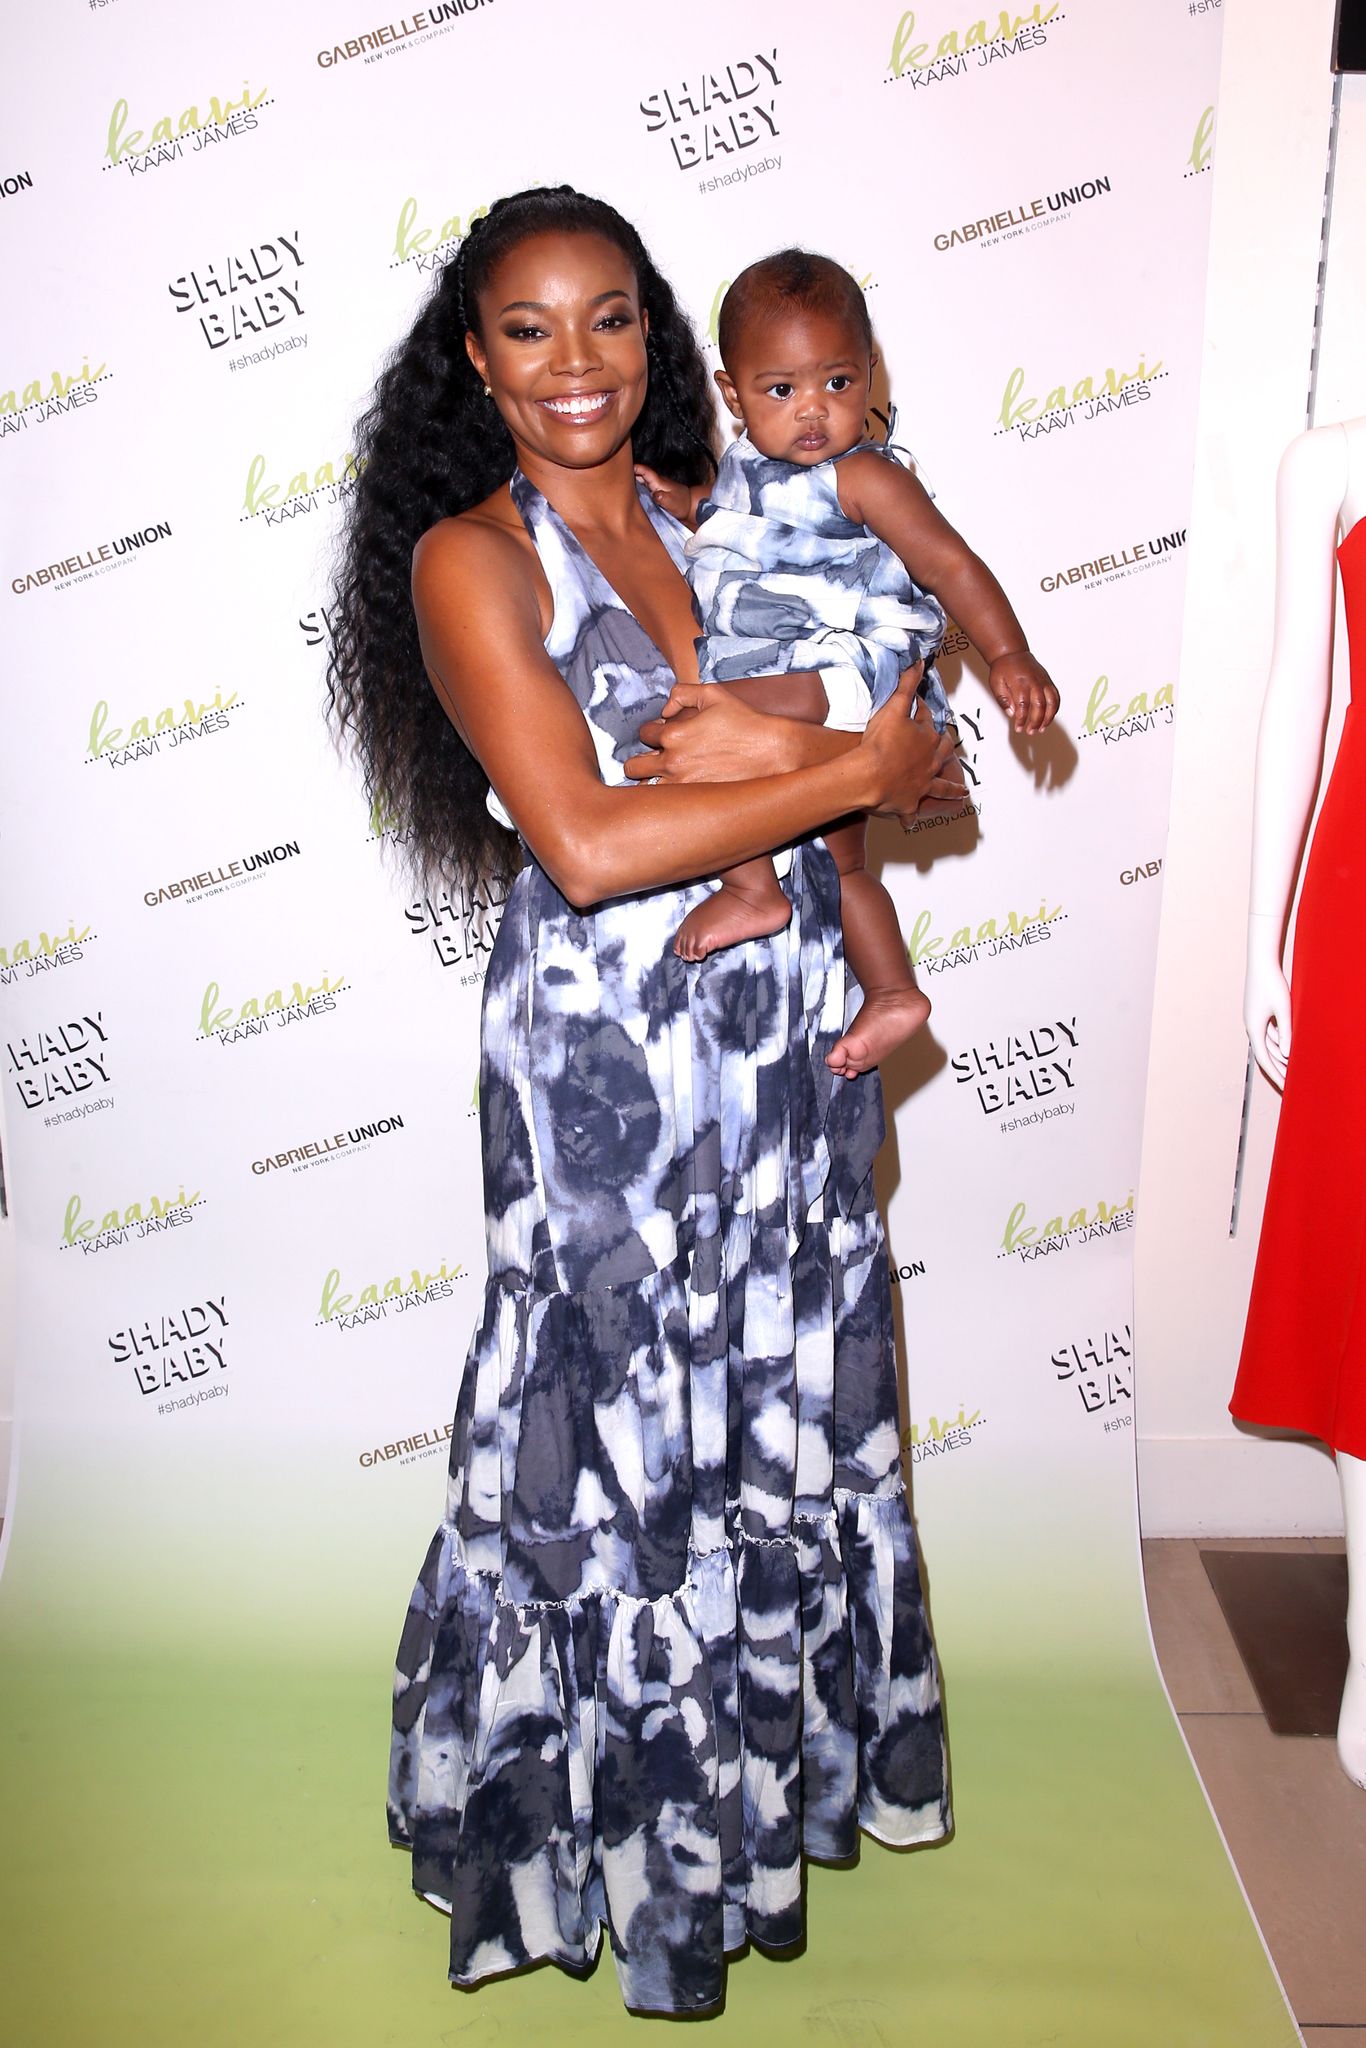 Gabrielle Union and Kaavia James Union Wade at New York & Company Store in Burbank, CA to launch the Kaavia James Collection on May 09, 2019. | Photo: Getty Images